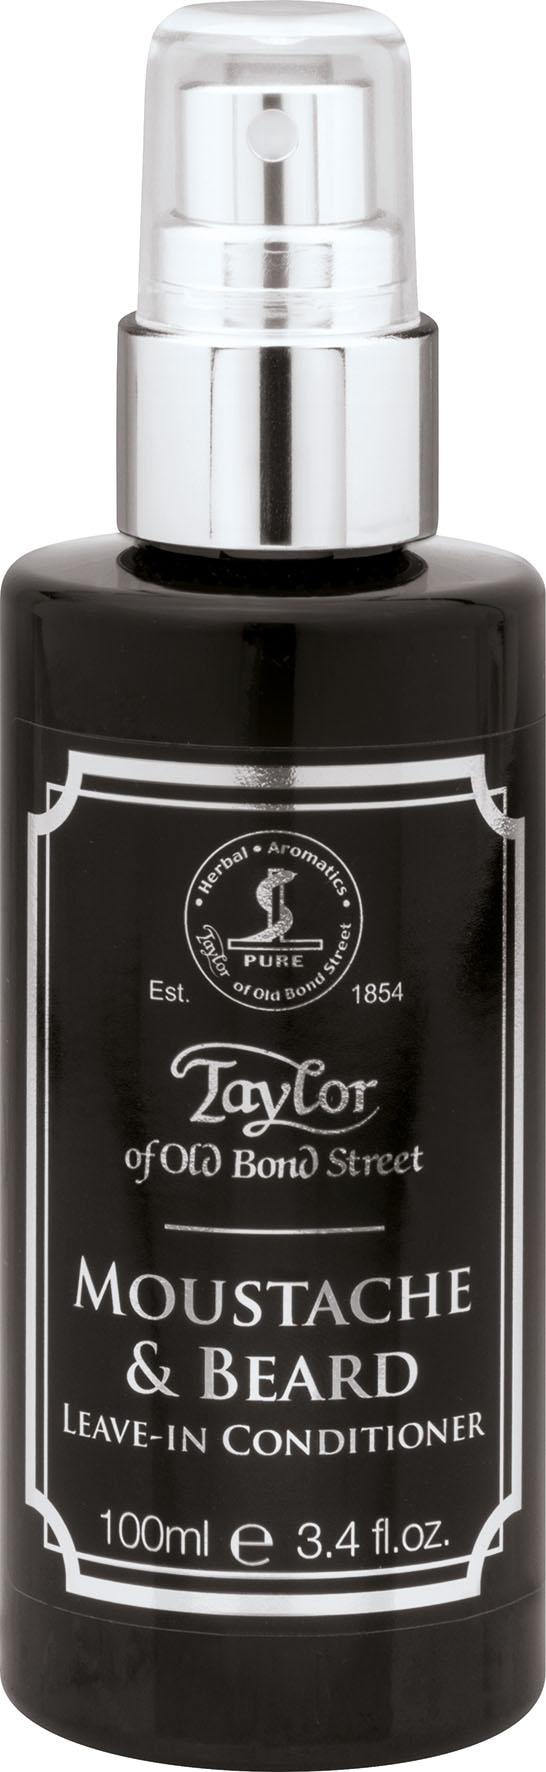 Taylor of kaufen & Conditioner« Bartconditioner Bond »Moustache Leave-In bei OTTO Beard Street Old online